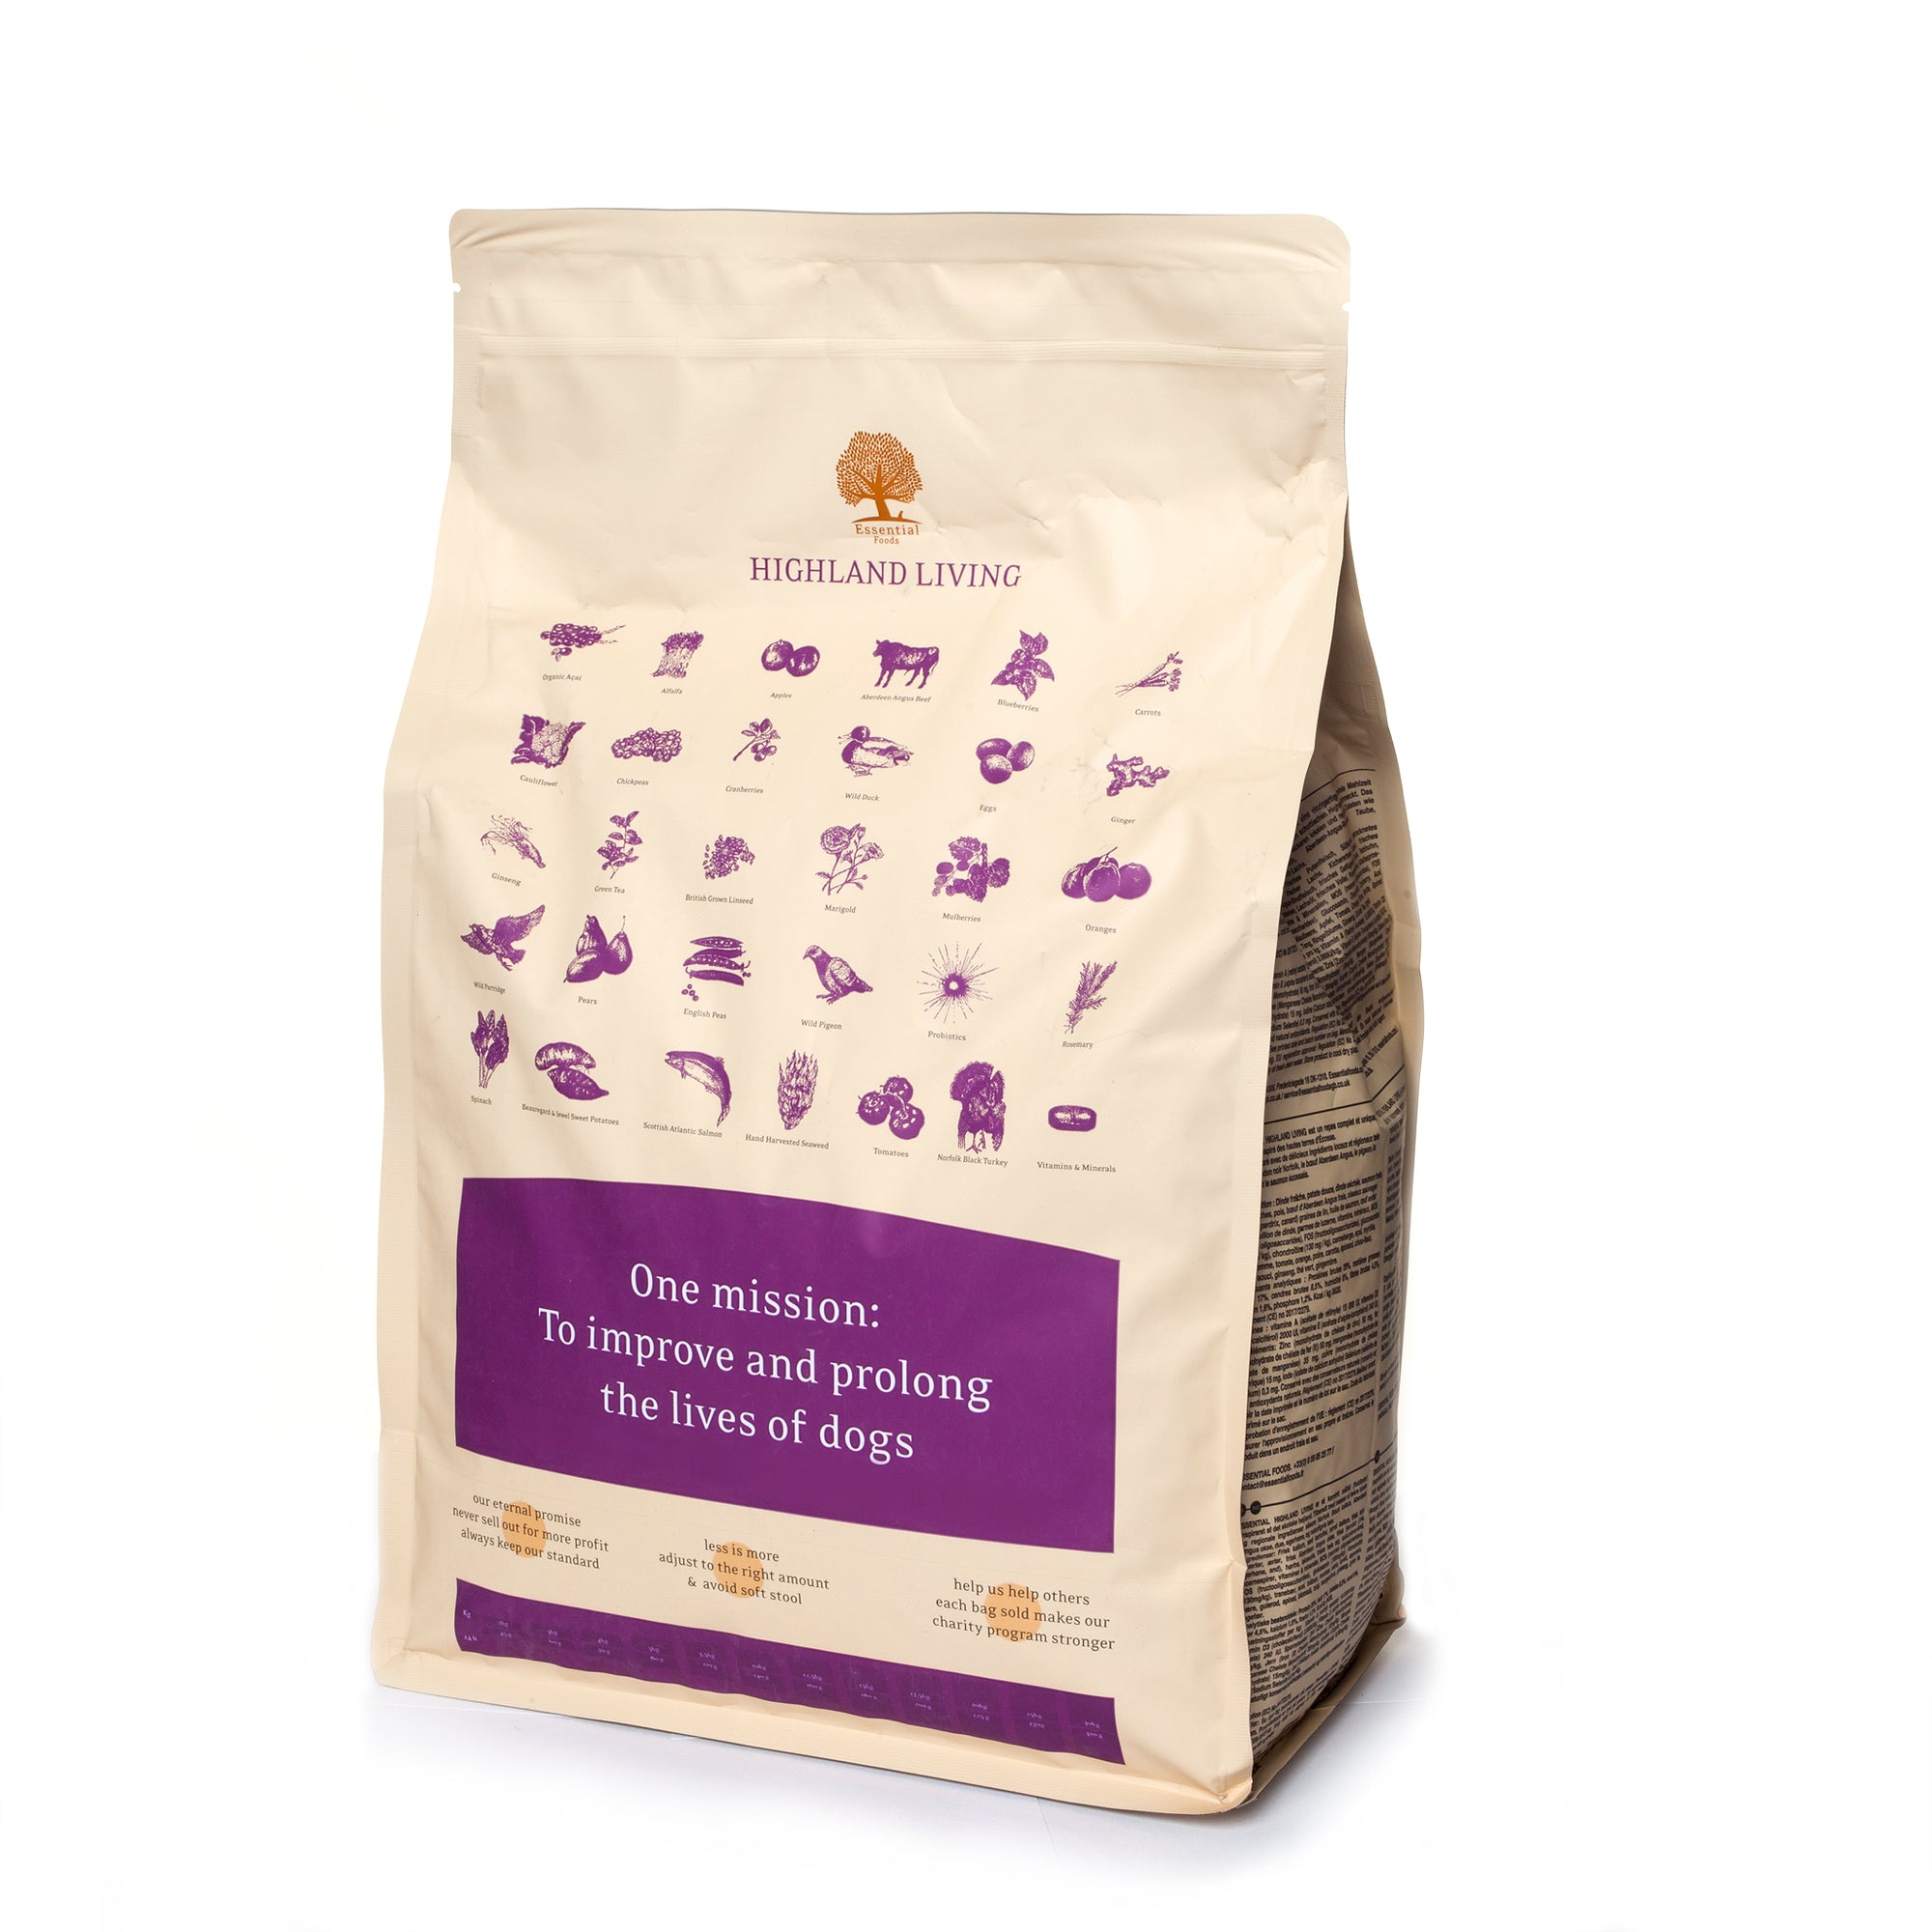 79% meat Norfolk turkey, Angus beef, irbe, pigeon, duck, salmon, eggs Super premium grainless feed for adult dogs of small breeds weighing up to 15kg HIGHLAND LIVING